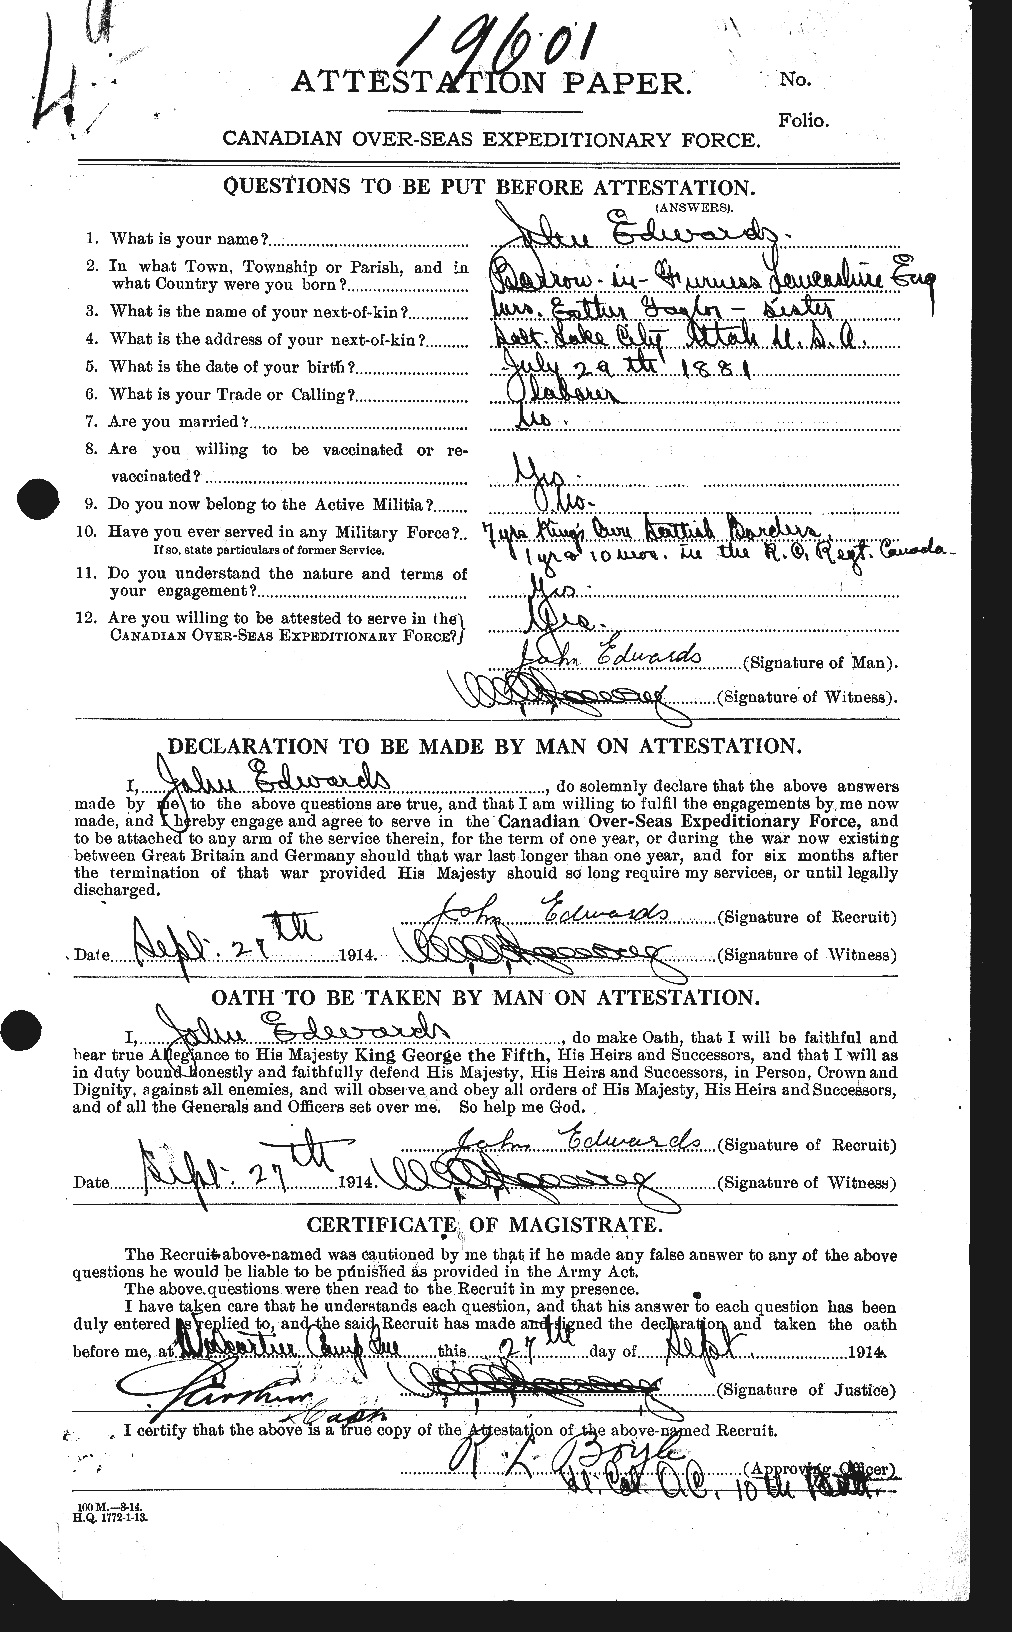 Personnel Records of the First World War - CEF 309831a